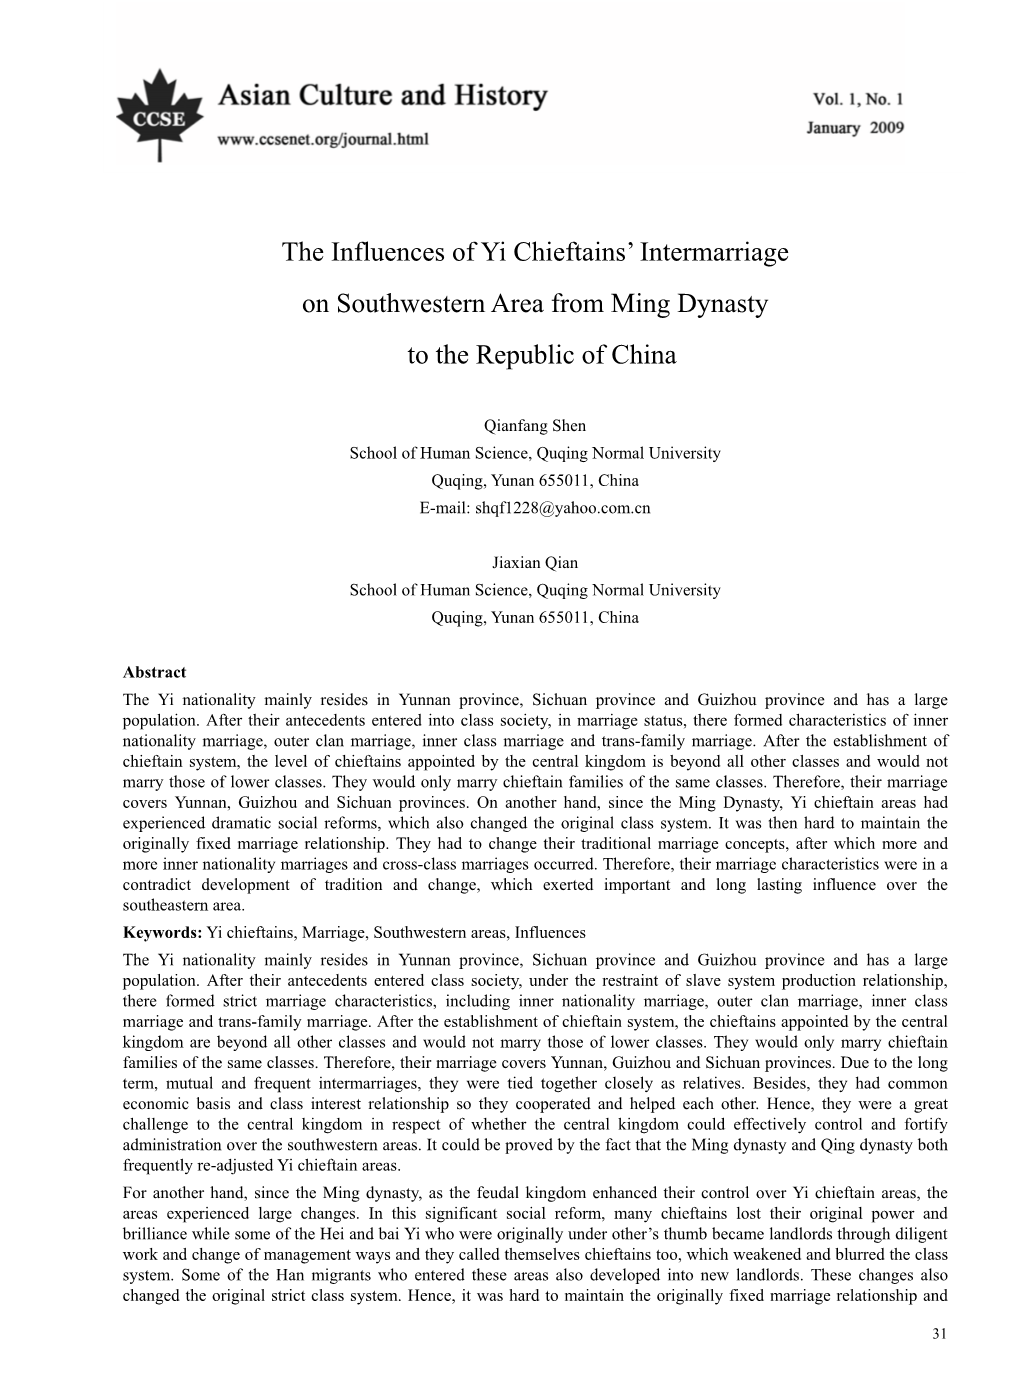 The Influences of Yi Chieftains' Intermarriage on Southwestern